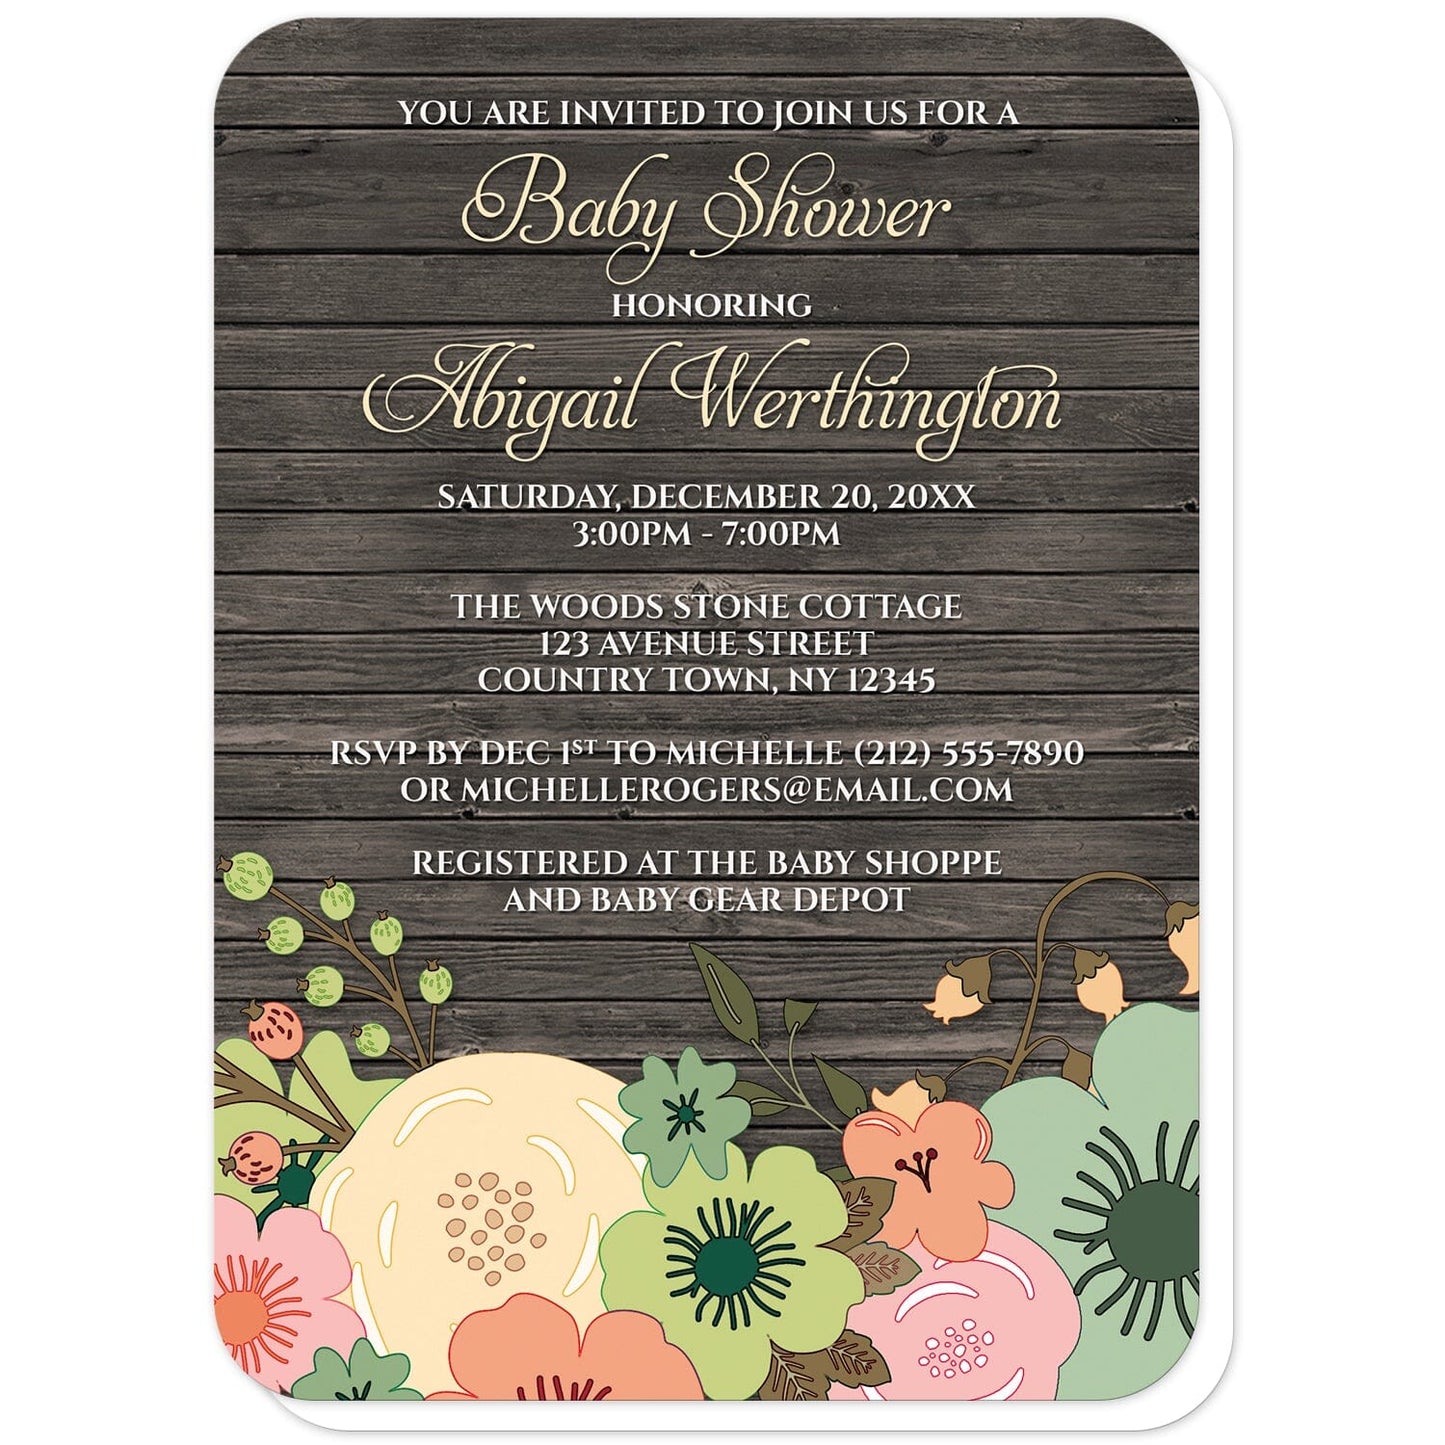 Rustic Orange Teal Floral Wood Baby Shower Invitations (with rounded corners) at Artistically Invited. Rustic orange teal floral wood baby shower invitations designed with a southern country orange, beige, and teal floral theme with pink and green accent flowers. This floral illustration is printed along the bottom of the invitations over a brown rustic wood background. Your personalized baby shower celebration details are custom printed in beige and white over the wood design above the flowers.